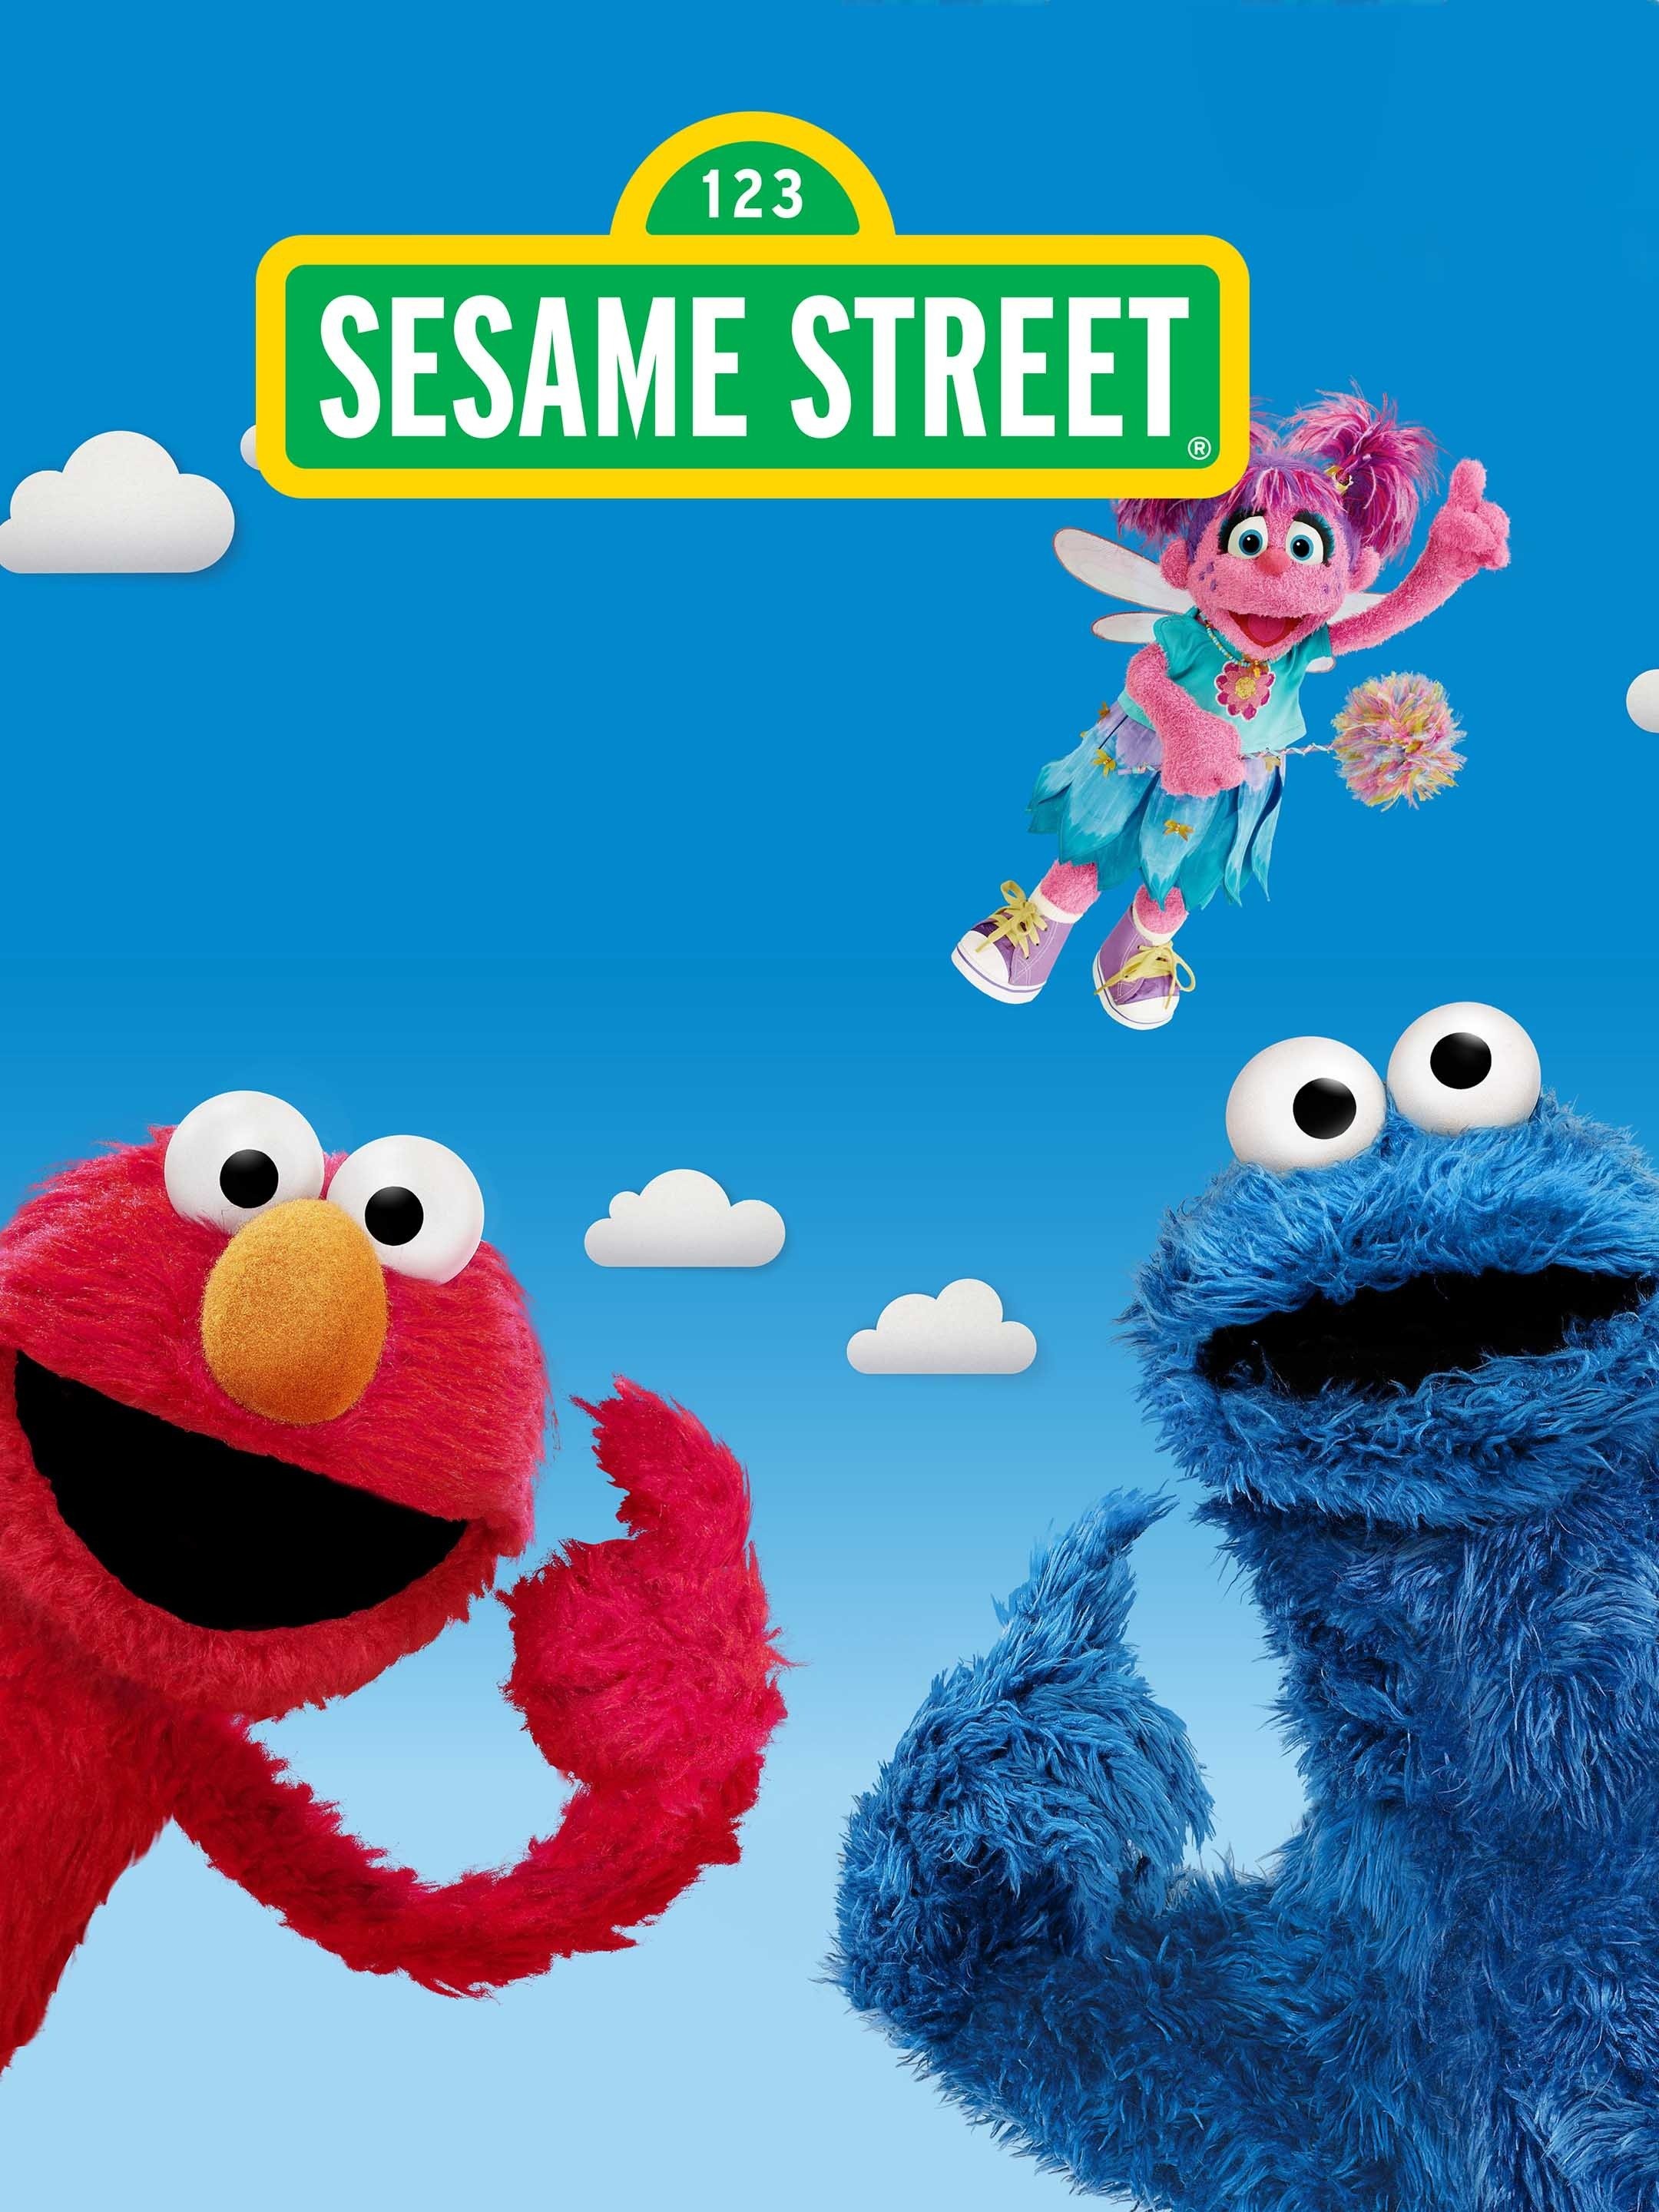 Play With Me Sesame - Rotten Tomatoes